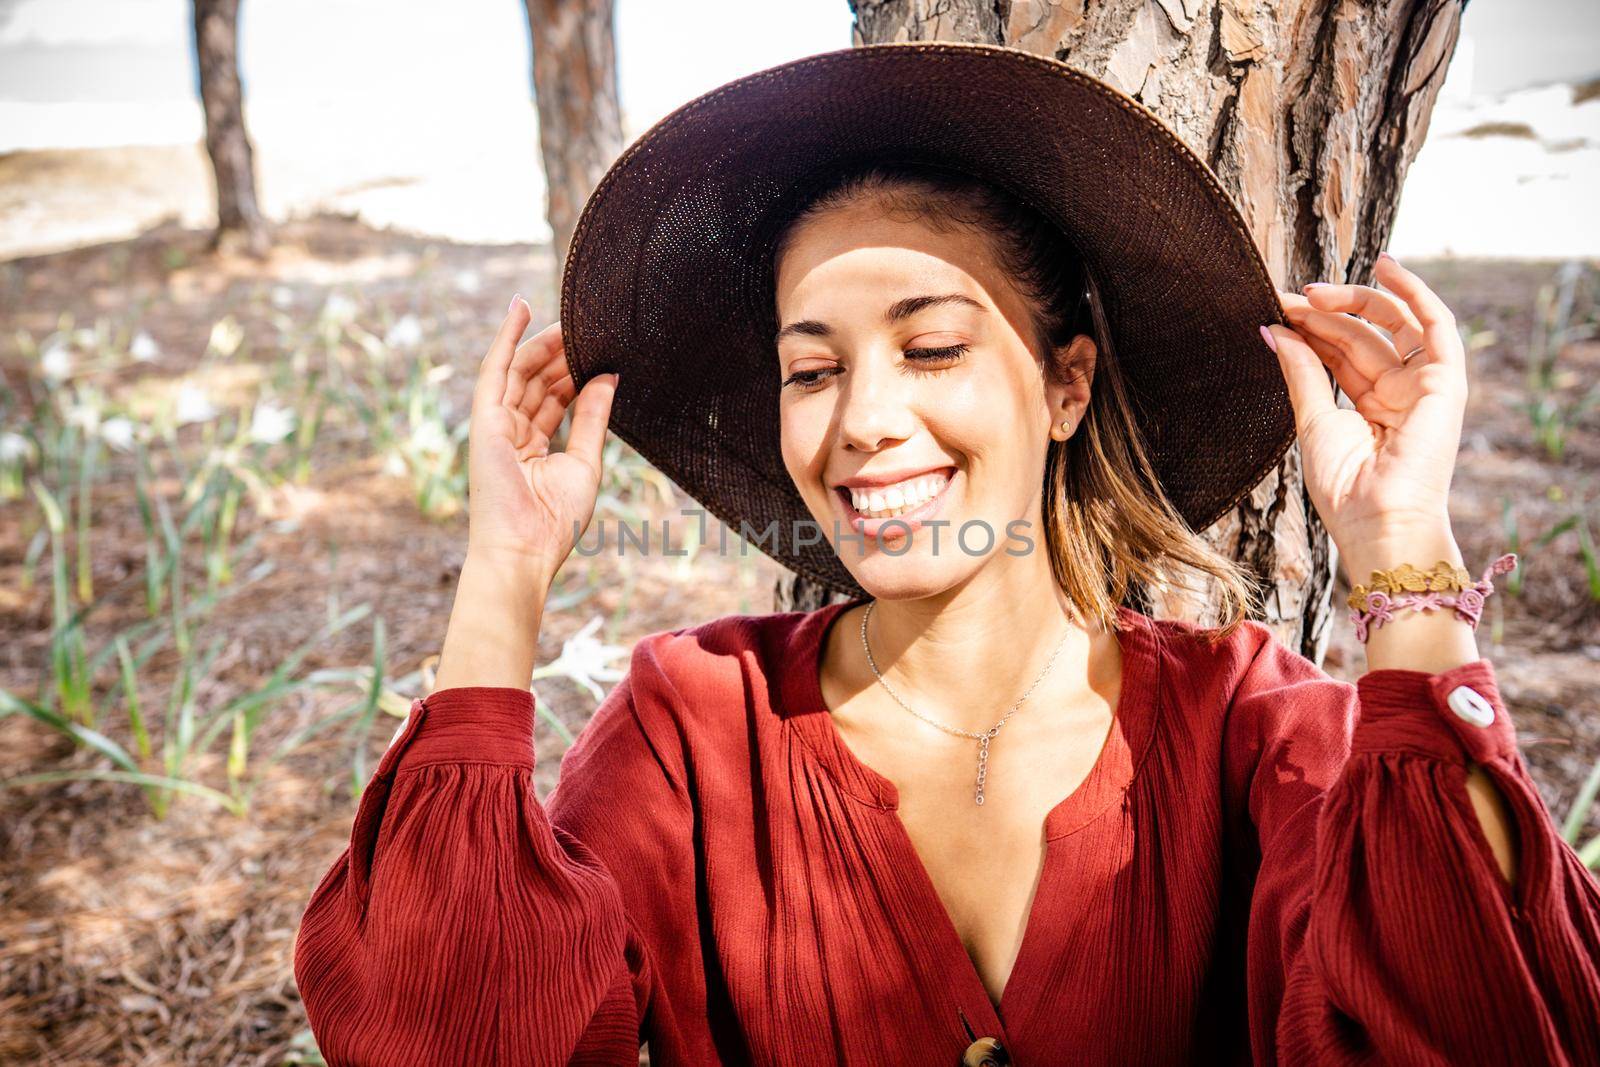 Toothy smiling Beautiful candid young model , wearing red shirt standing in nature pine forest illuminated from the sun holding with her hands brims of her wide hat. Fashion shoot for spring concept by robbyfontanesi